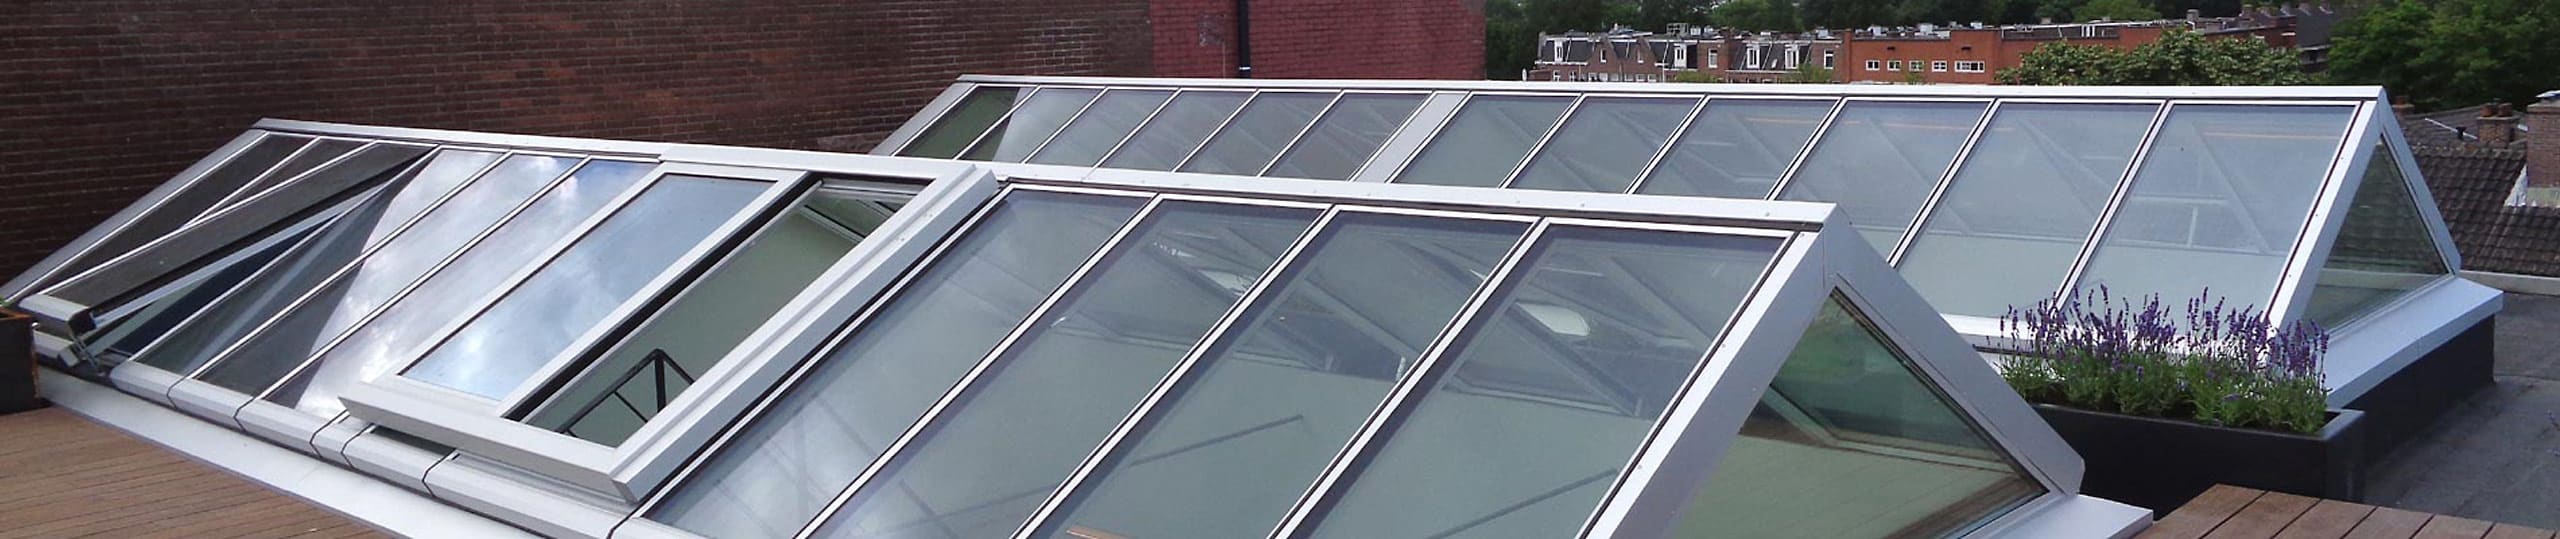 Dual pitched rooflights